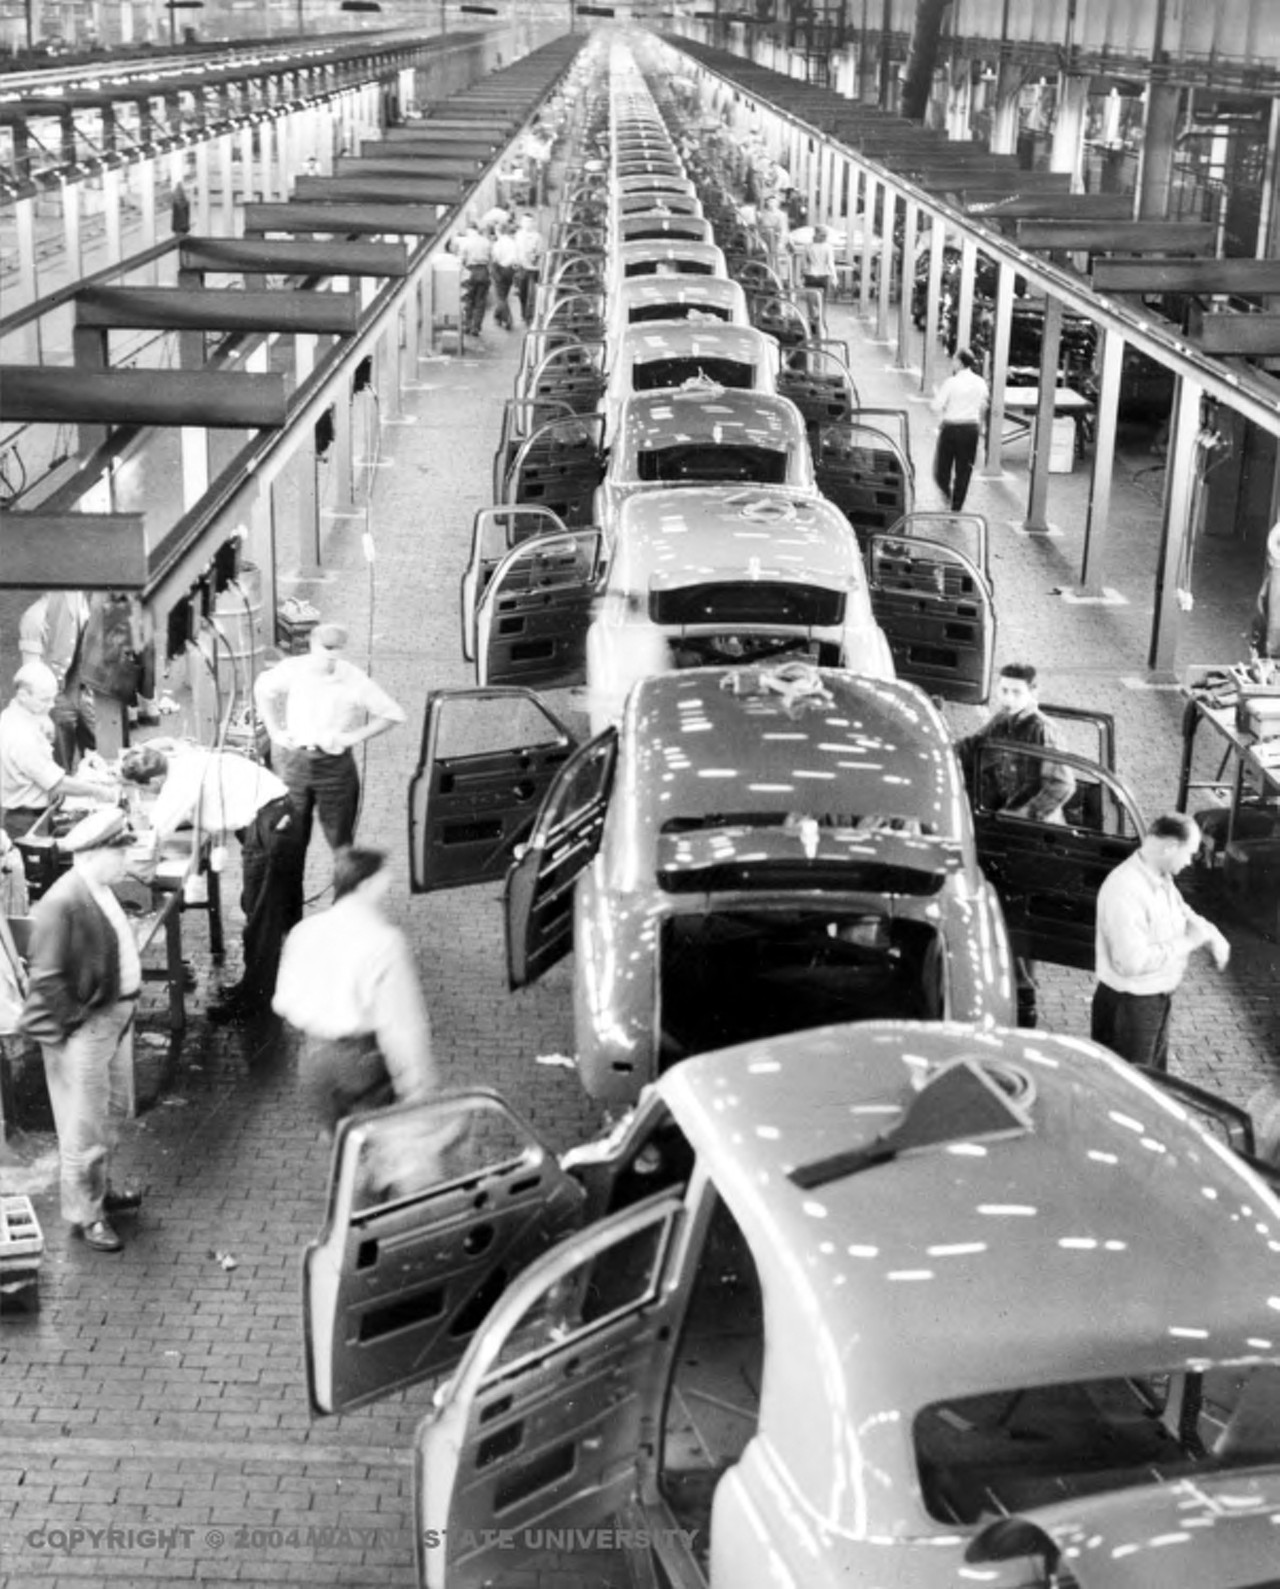 1940s - Kaiser-Frazer Motor Car Company in Willow Run
Just finishing up an assembly line of partially completed cars&#133; and counting the minutes until lunch (yeah, we&#146;re looking at you, guy on the right).